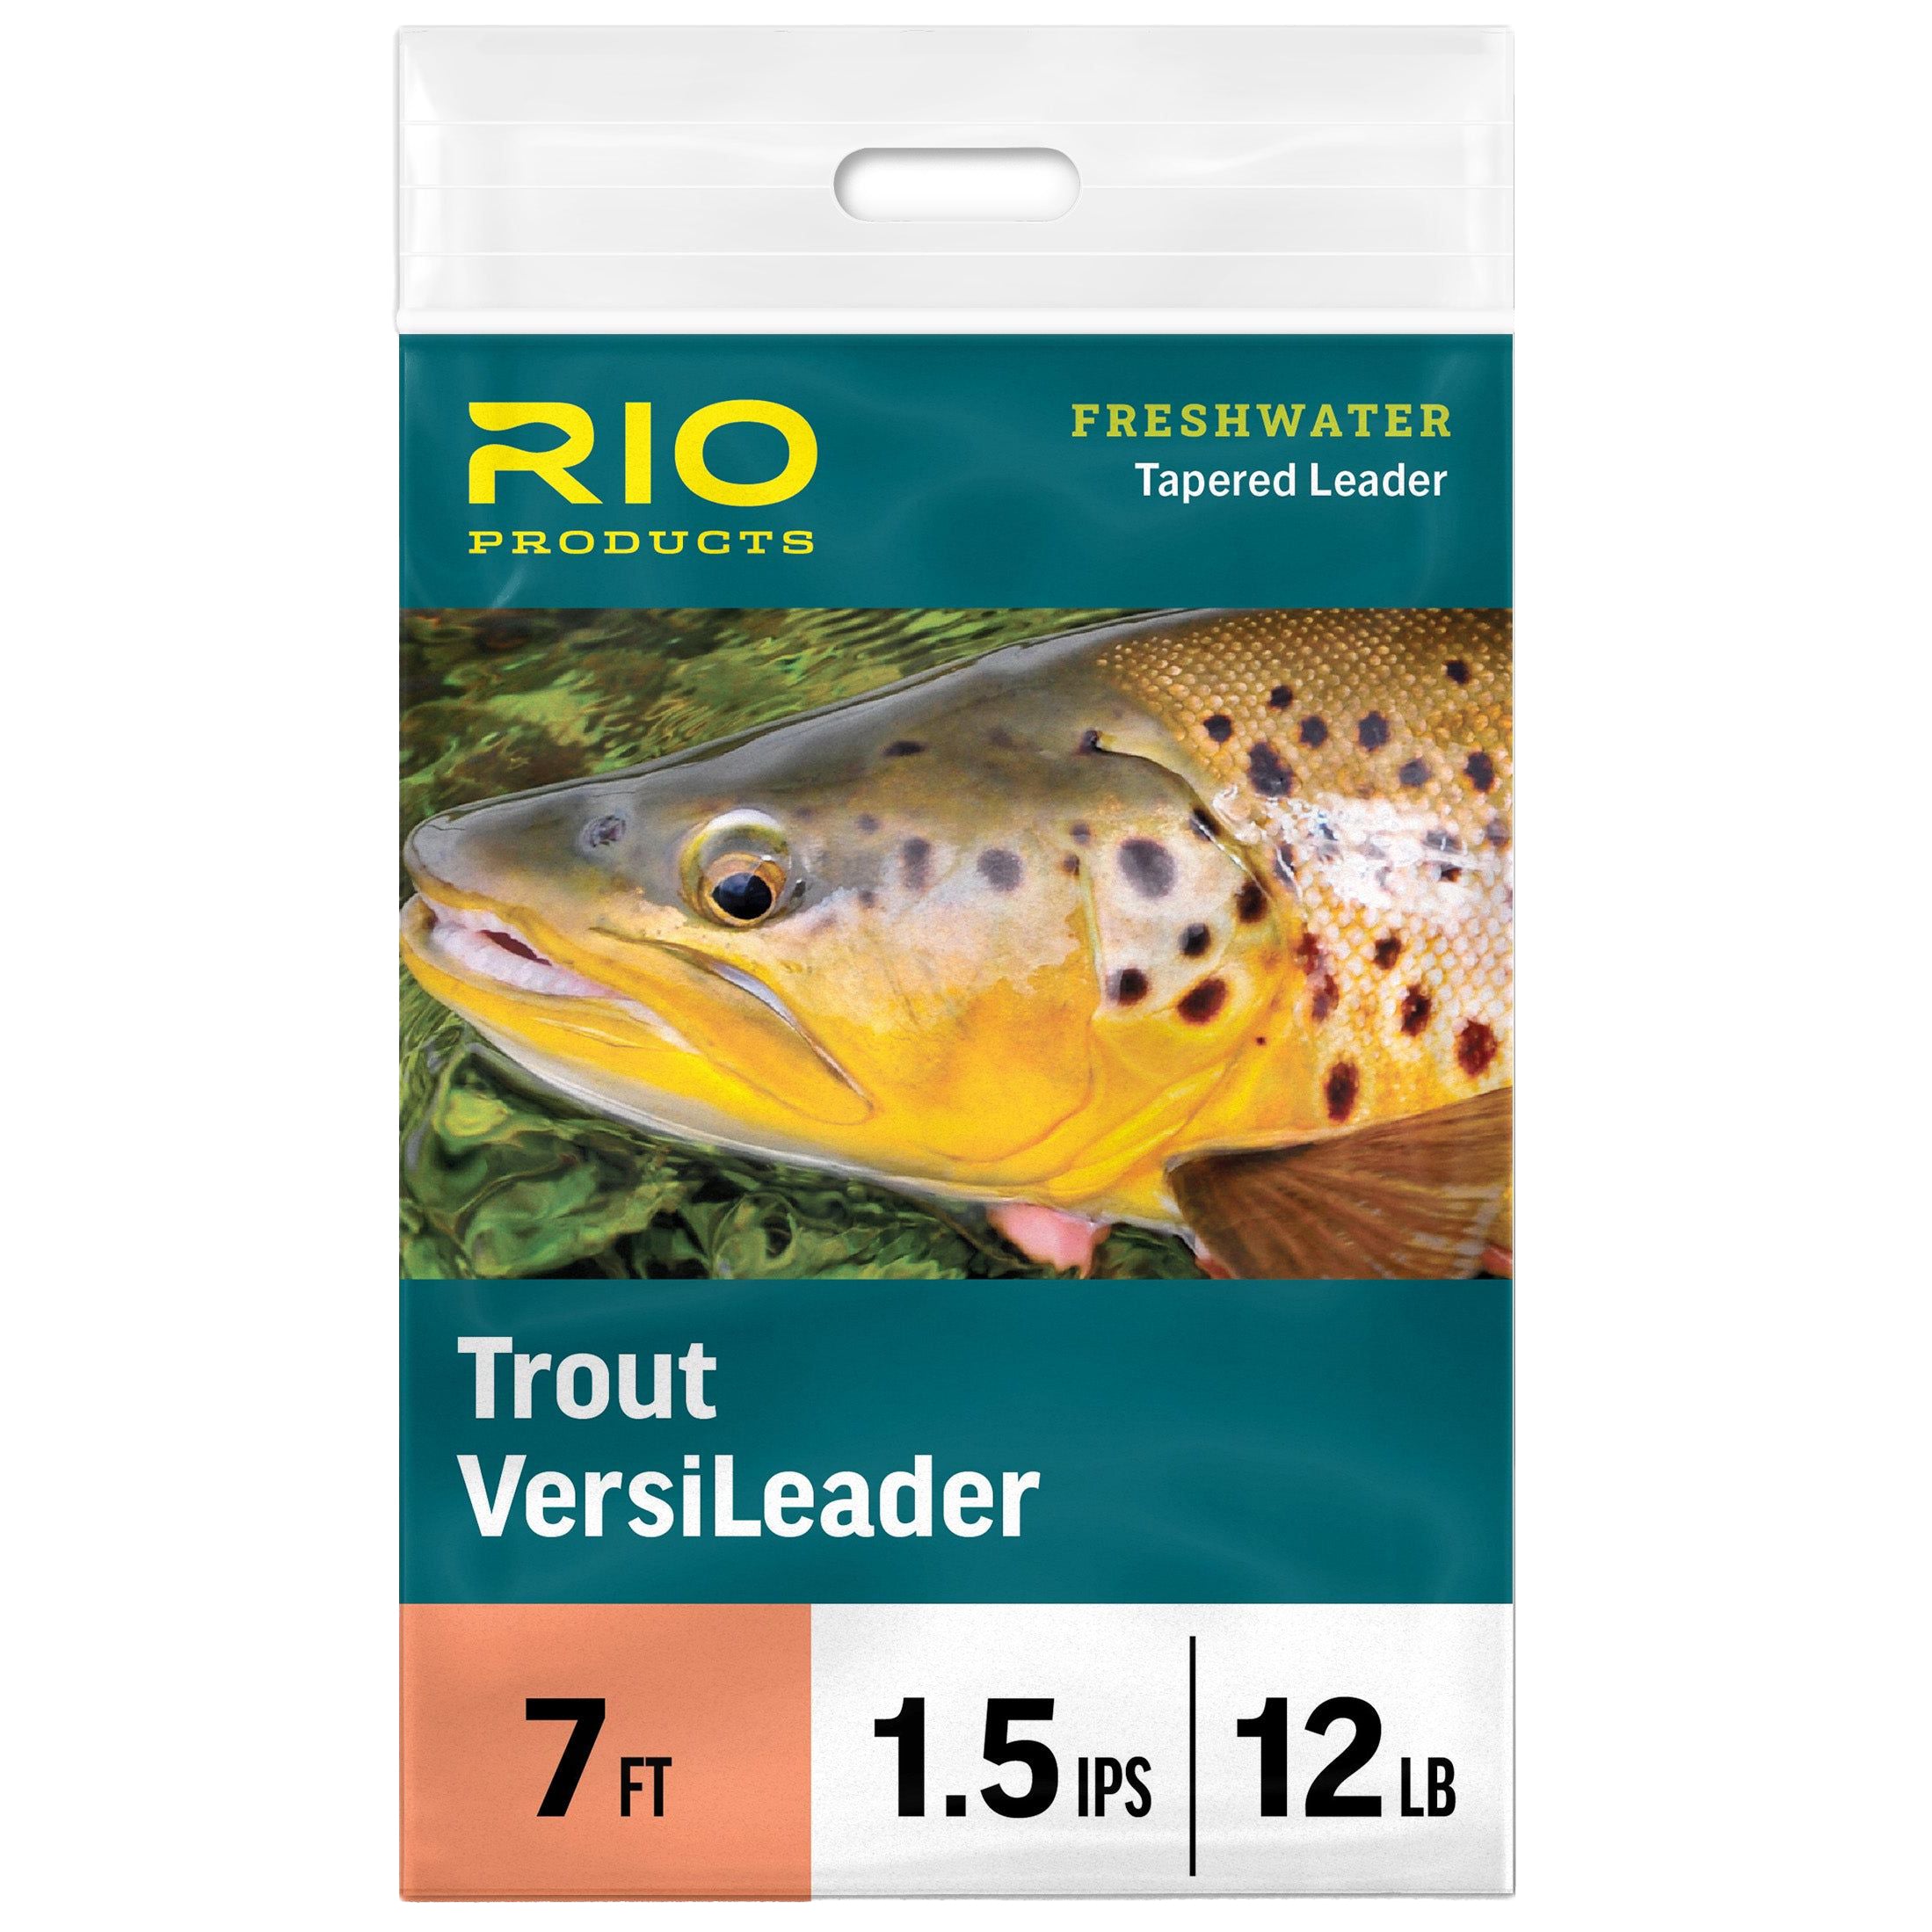 Rio Saltwater Tapered Leader - Tropical Line & Leader - Alaska Fly Fishing  Goods